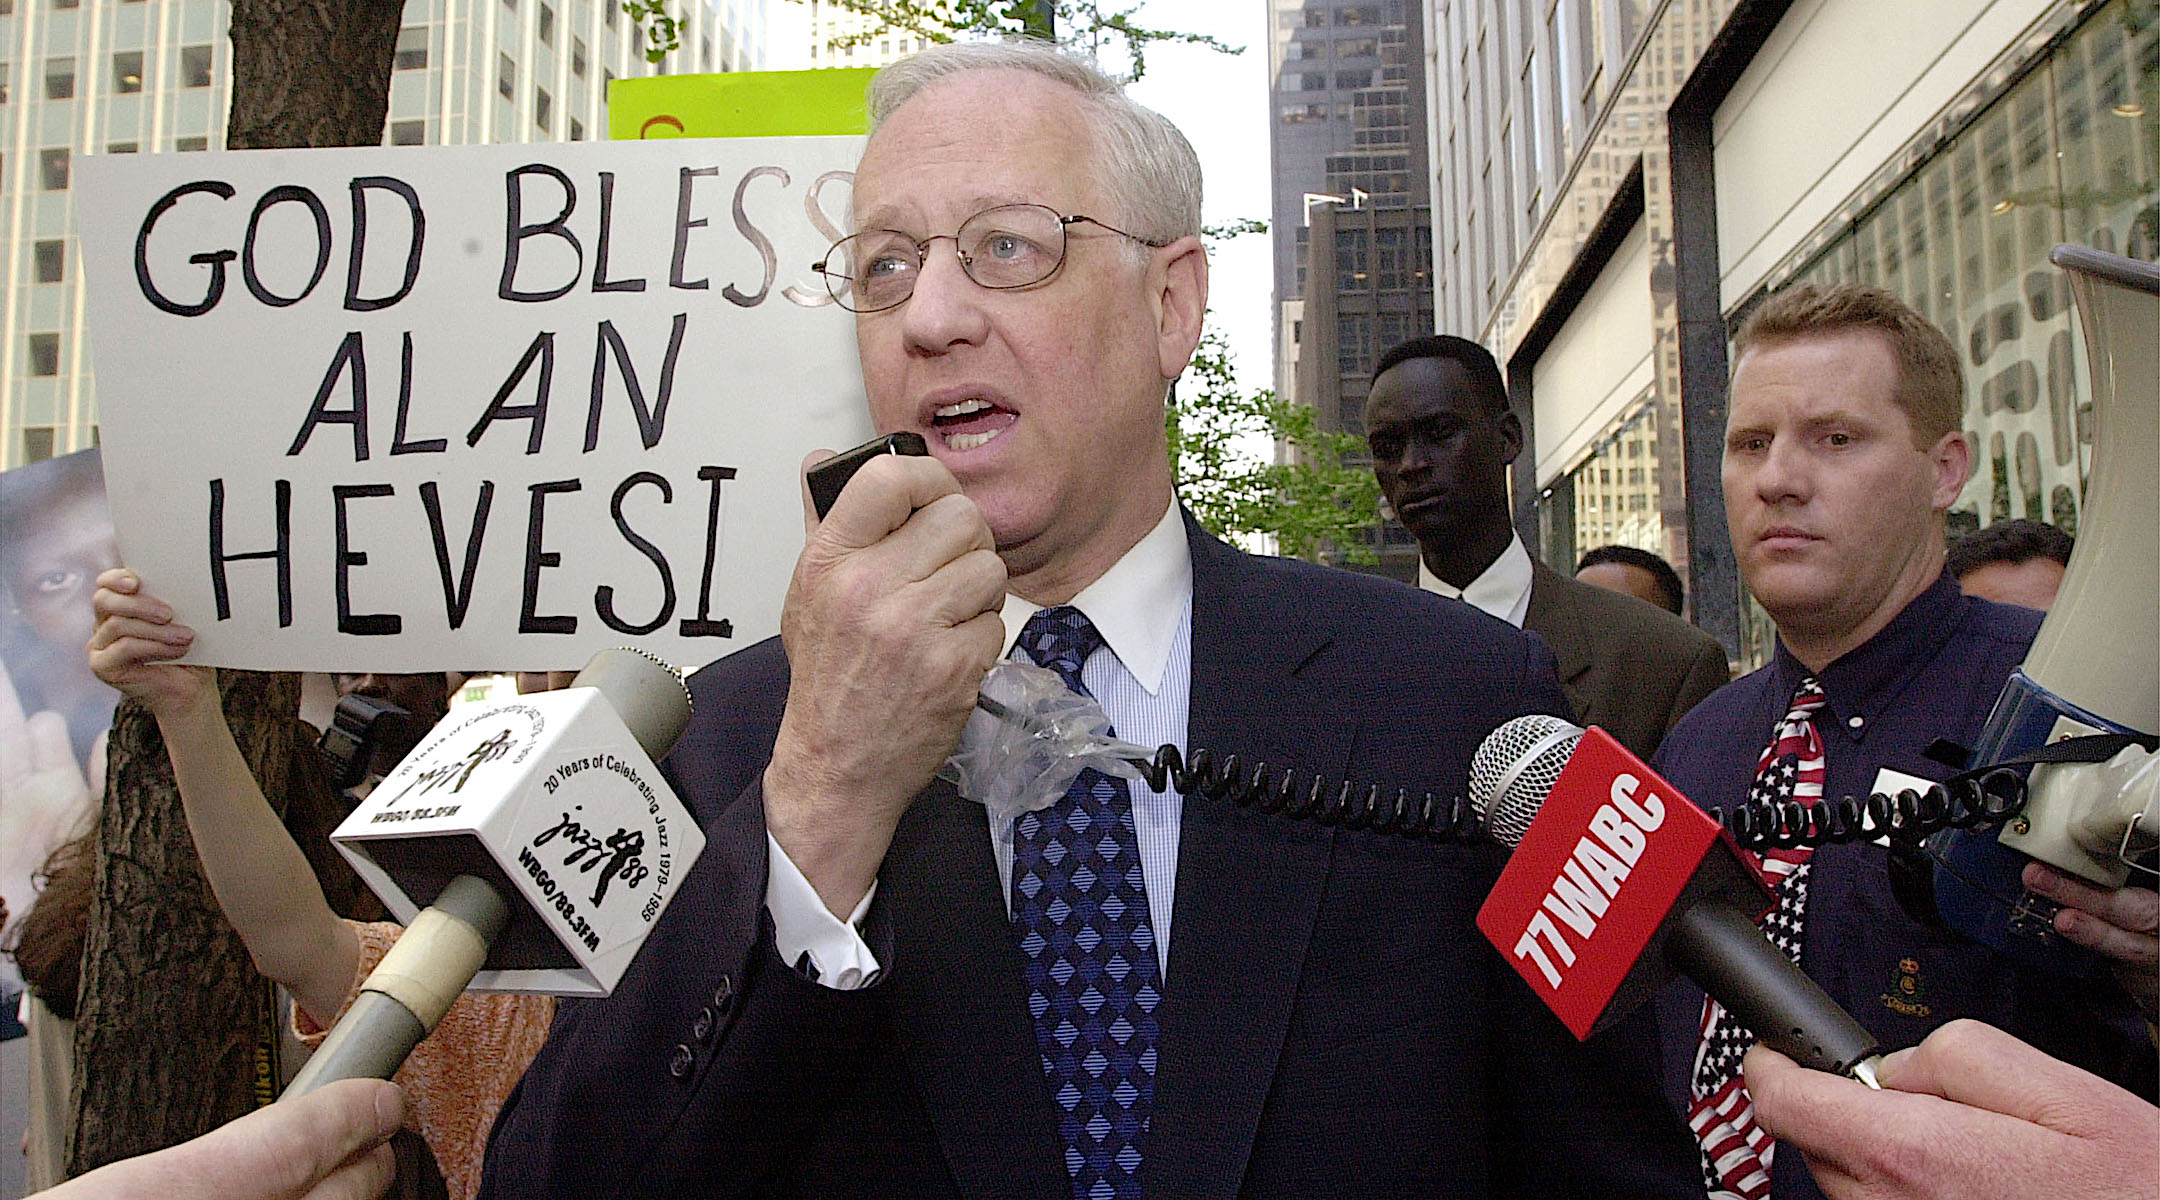 Alan Hevesi, running for mayor of New York, speaks at an anti-slavery protest in front of the New York Mission to Sudan, May 2, 2001. (Spencer Platt/Newsmakers via Getty)